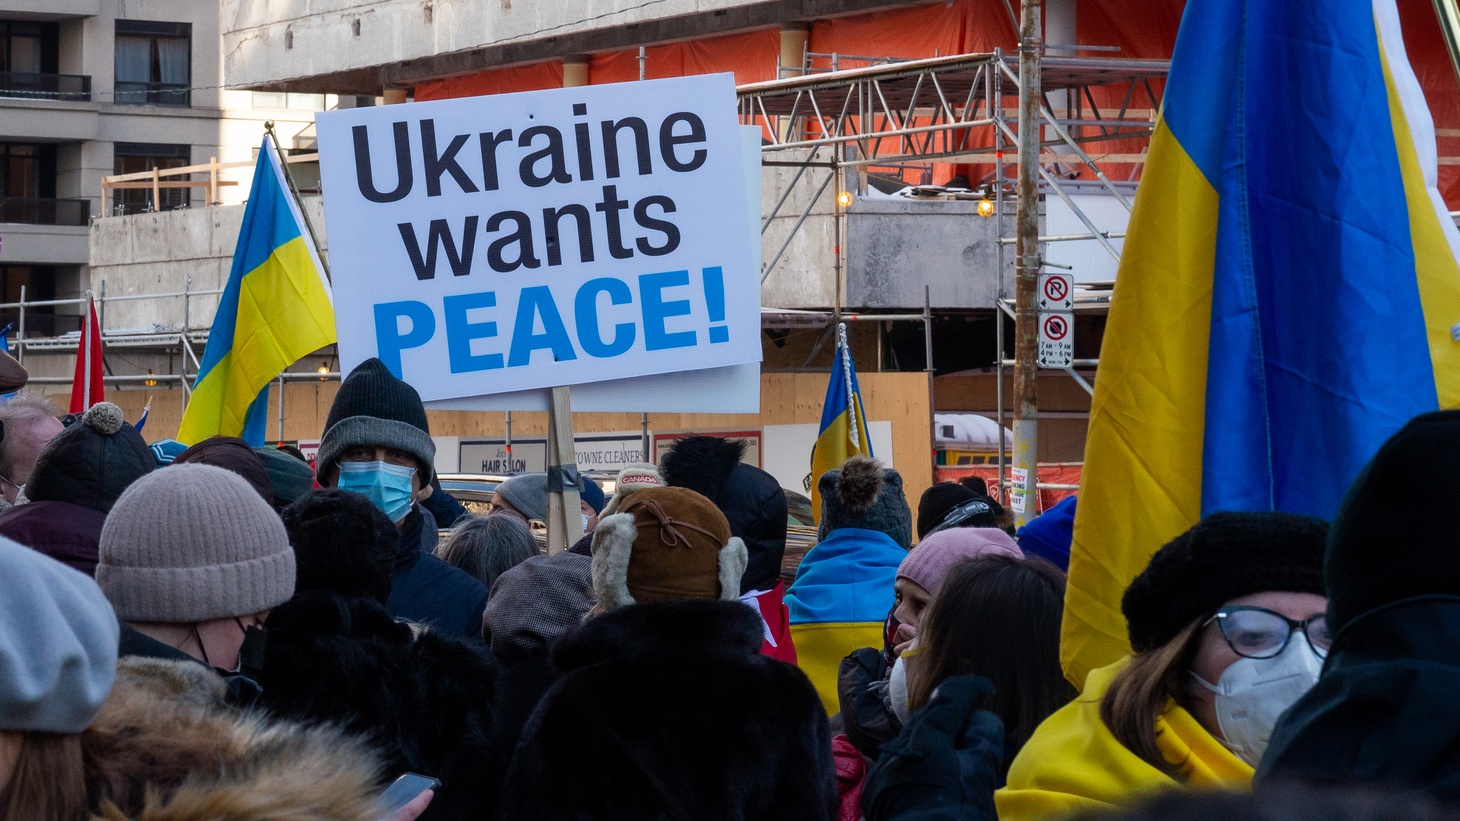 Calling for an End to the Conflict in Ukraine